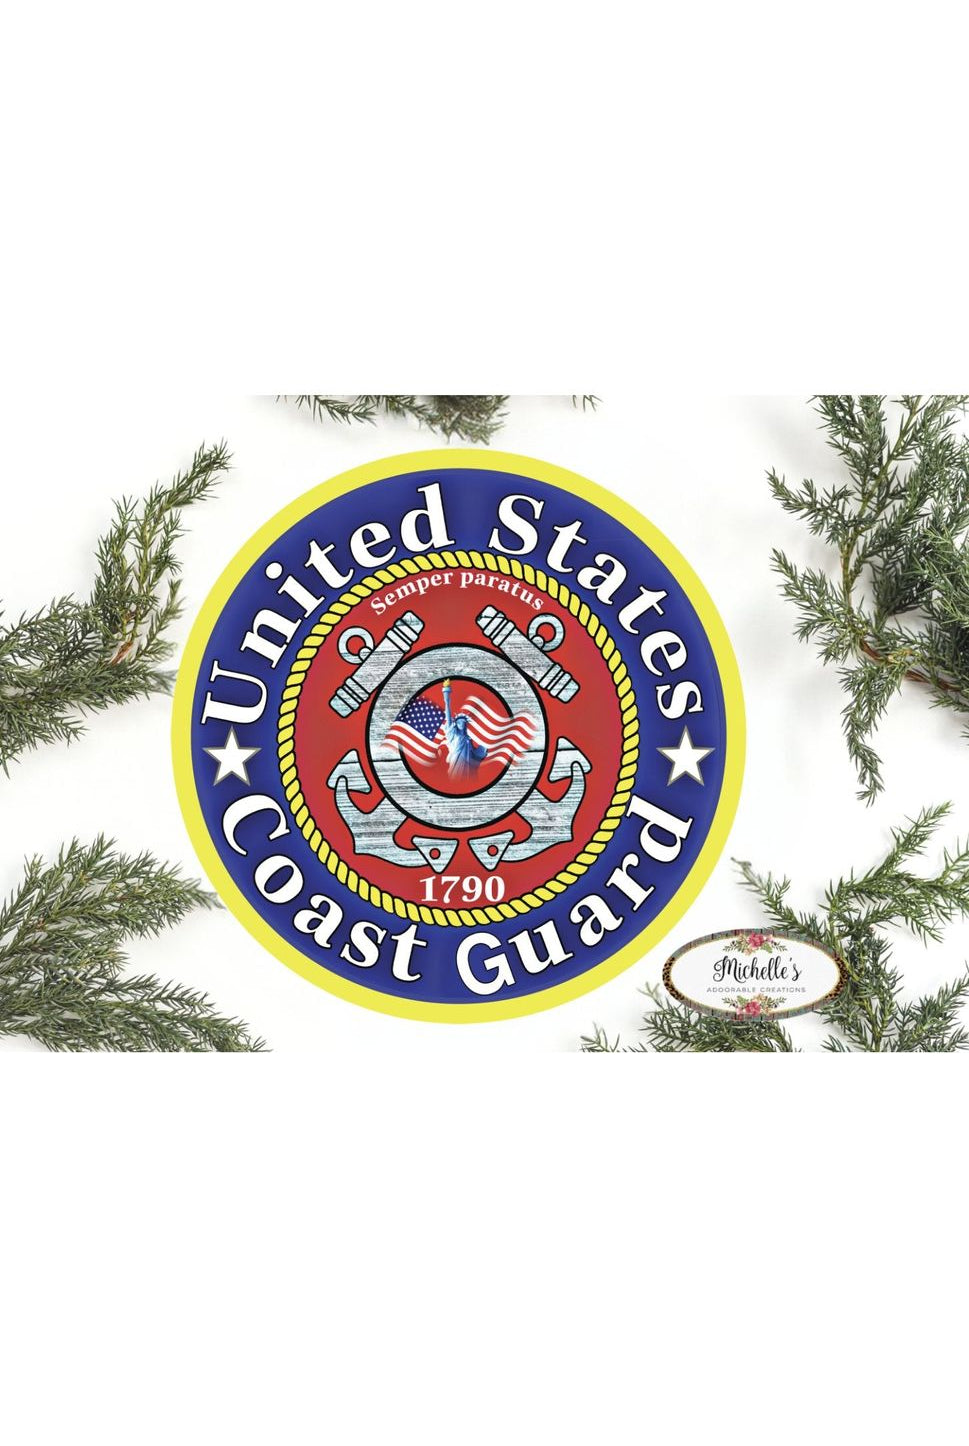 Shop For United States Coast Guard Support Sign - Wreath Enhancement